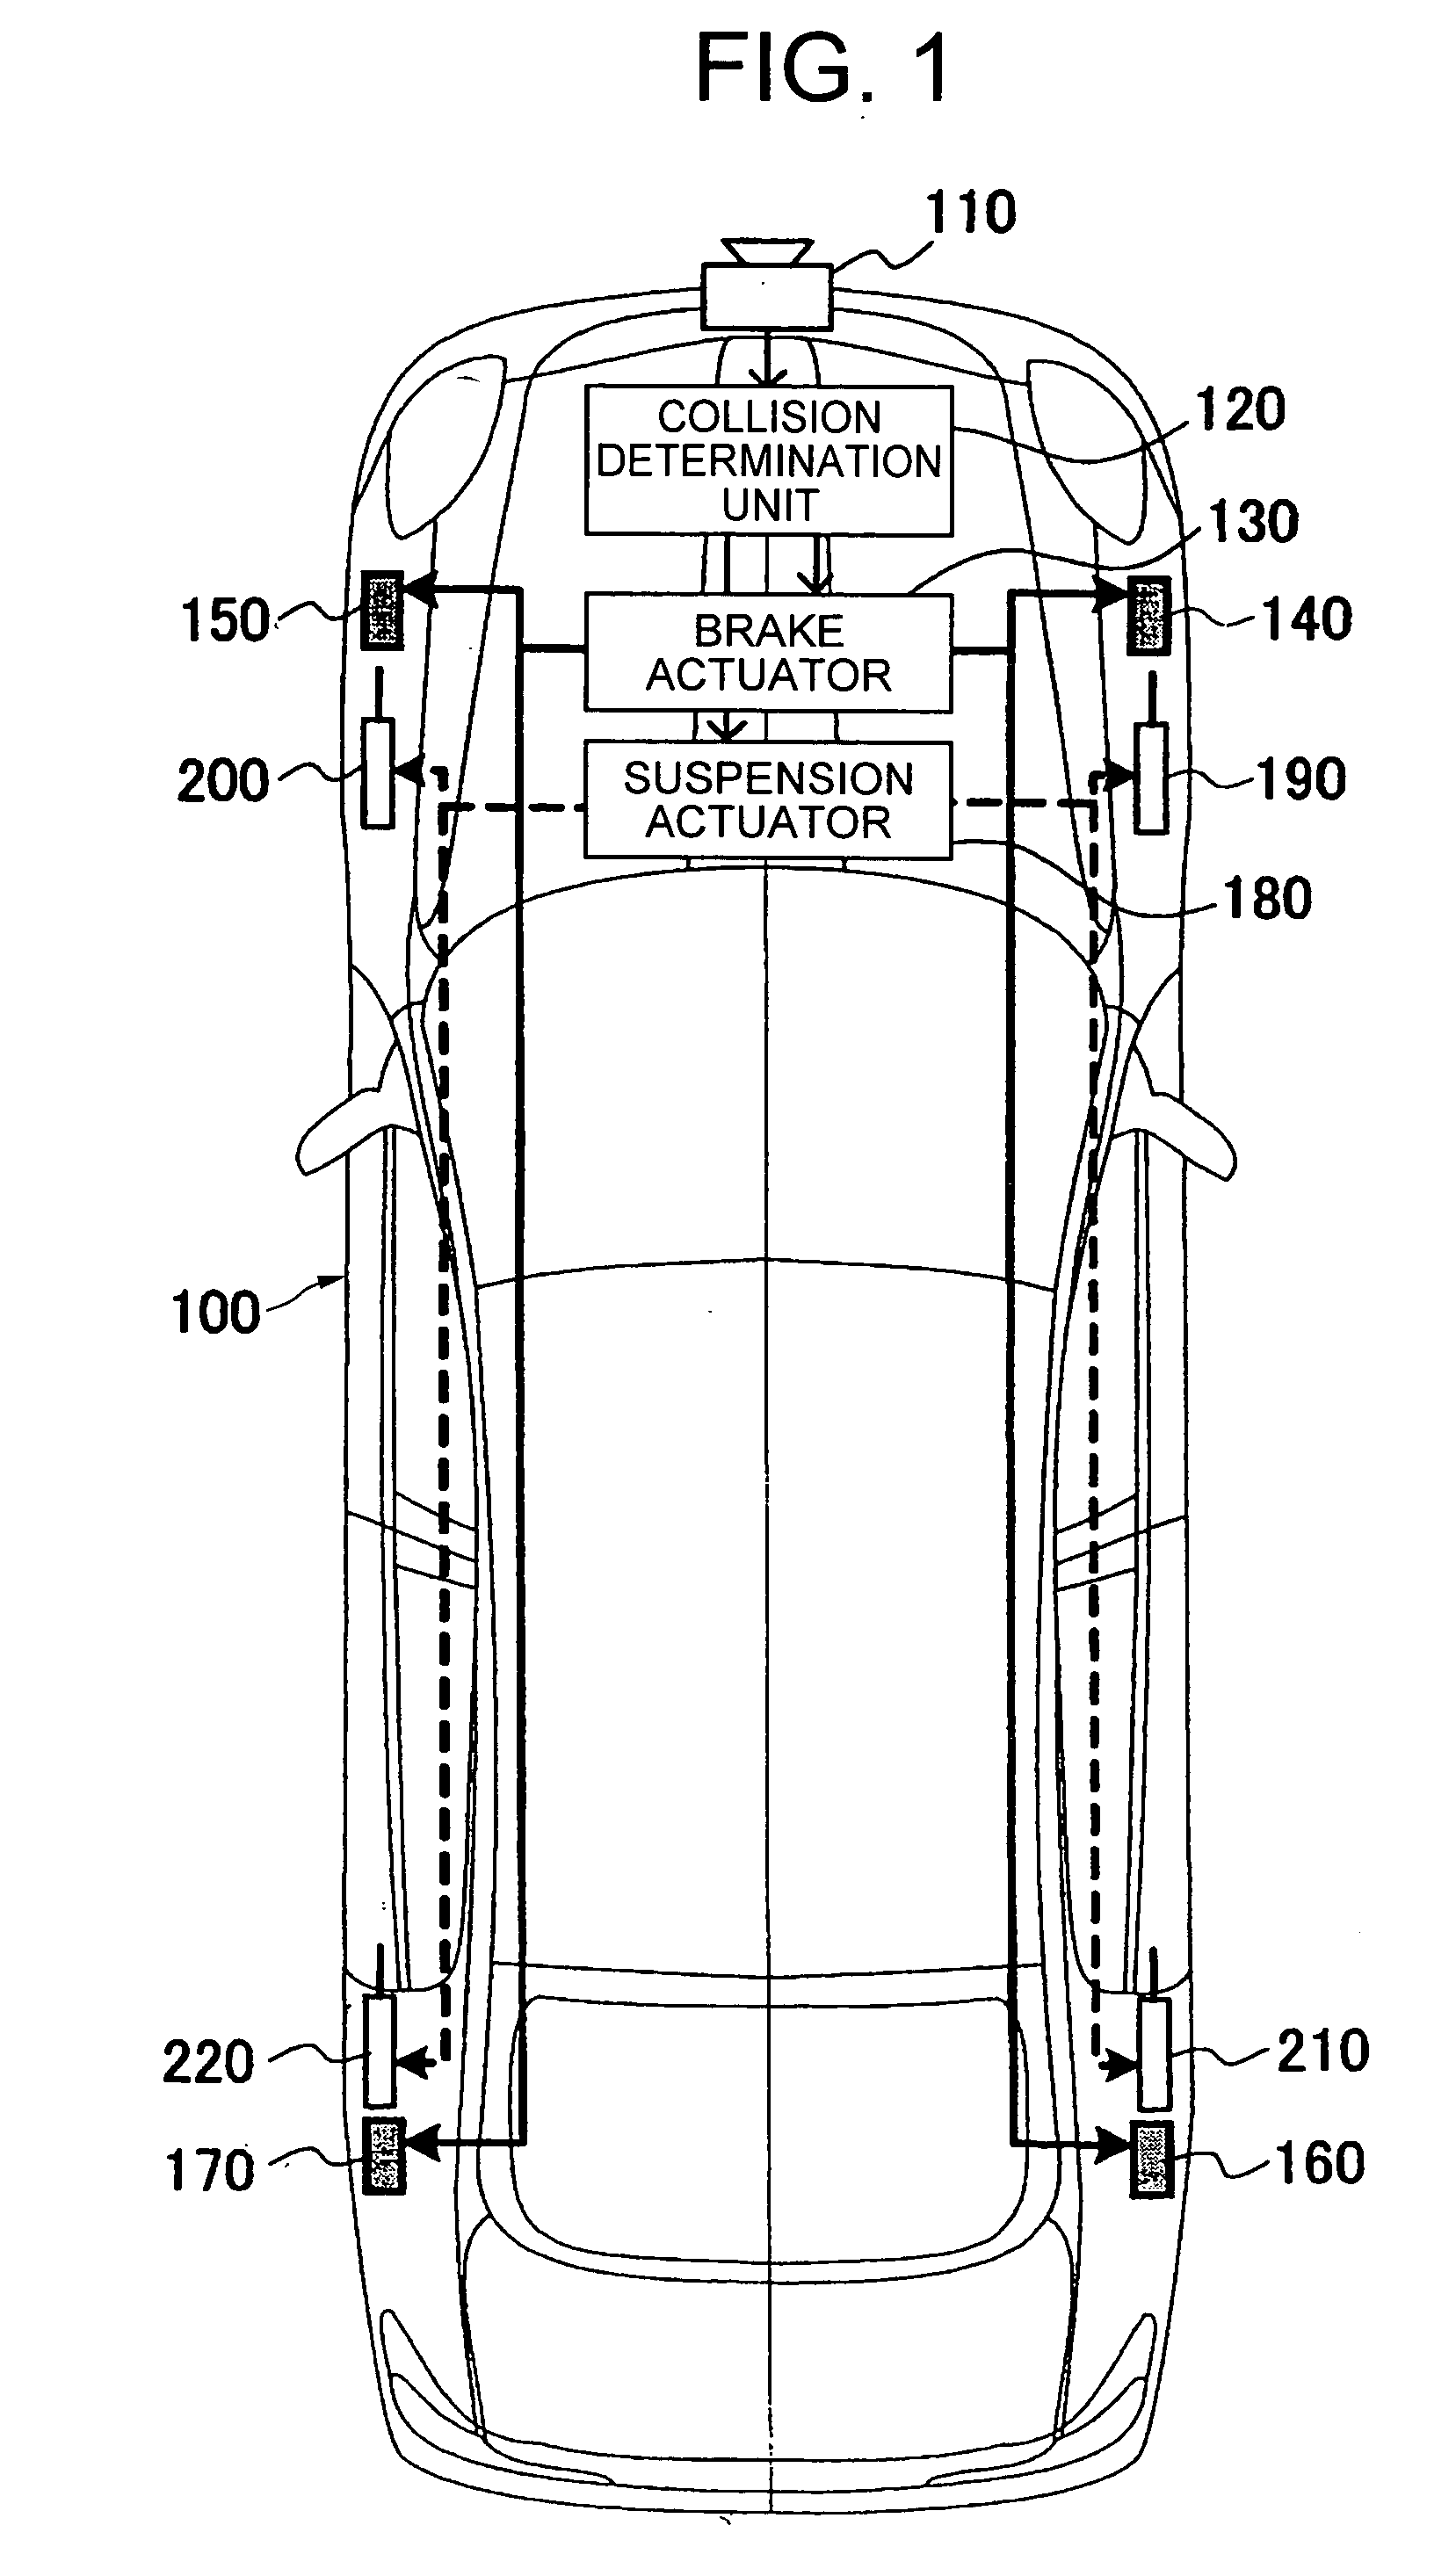 Vehicle safety control apparatus for avoiding collision